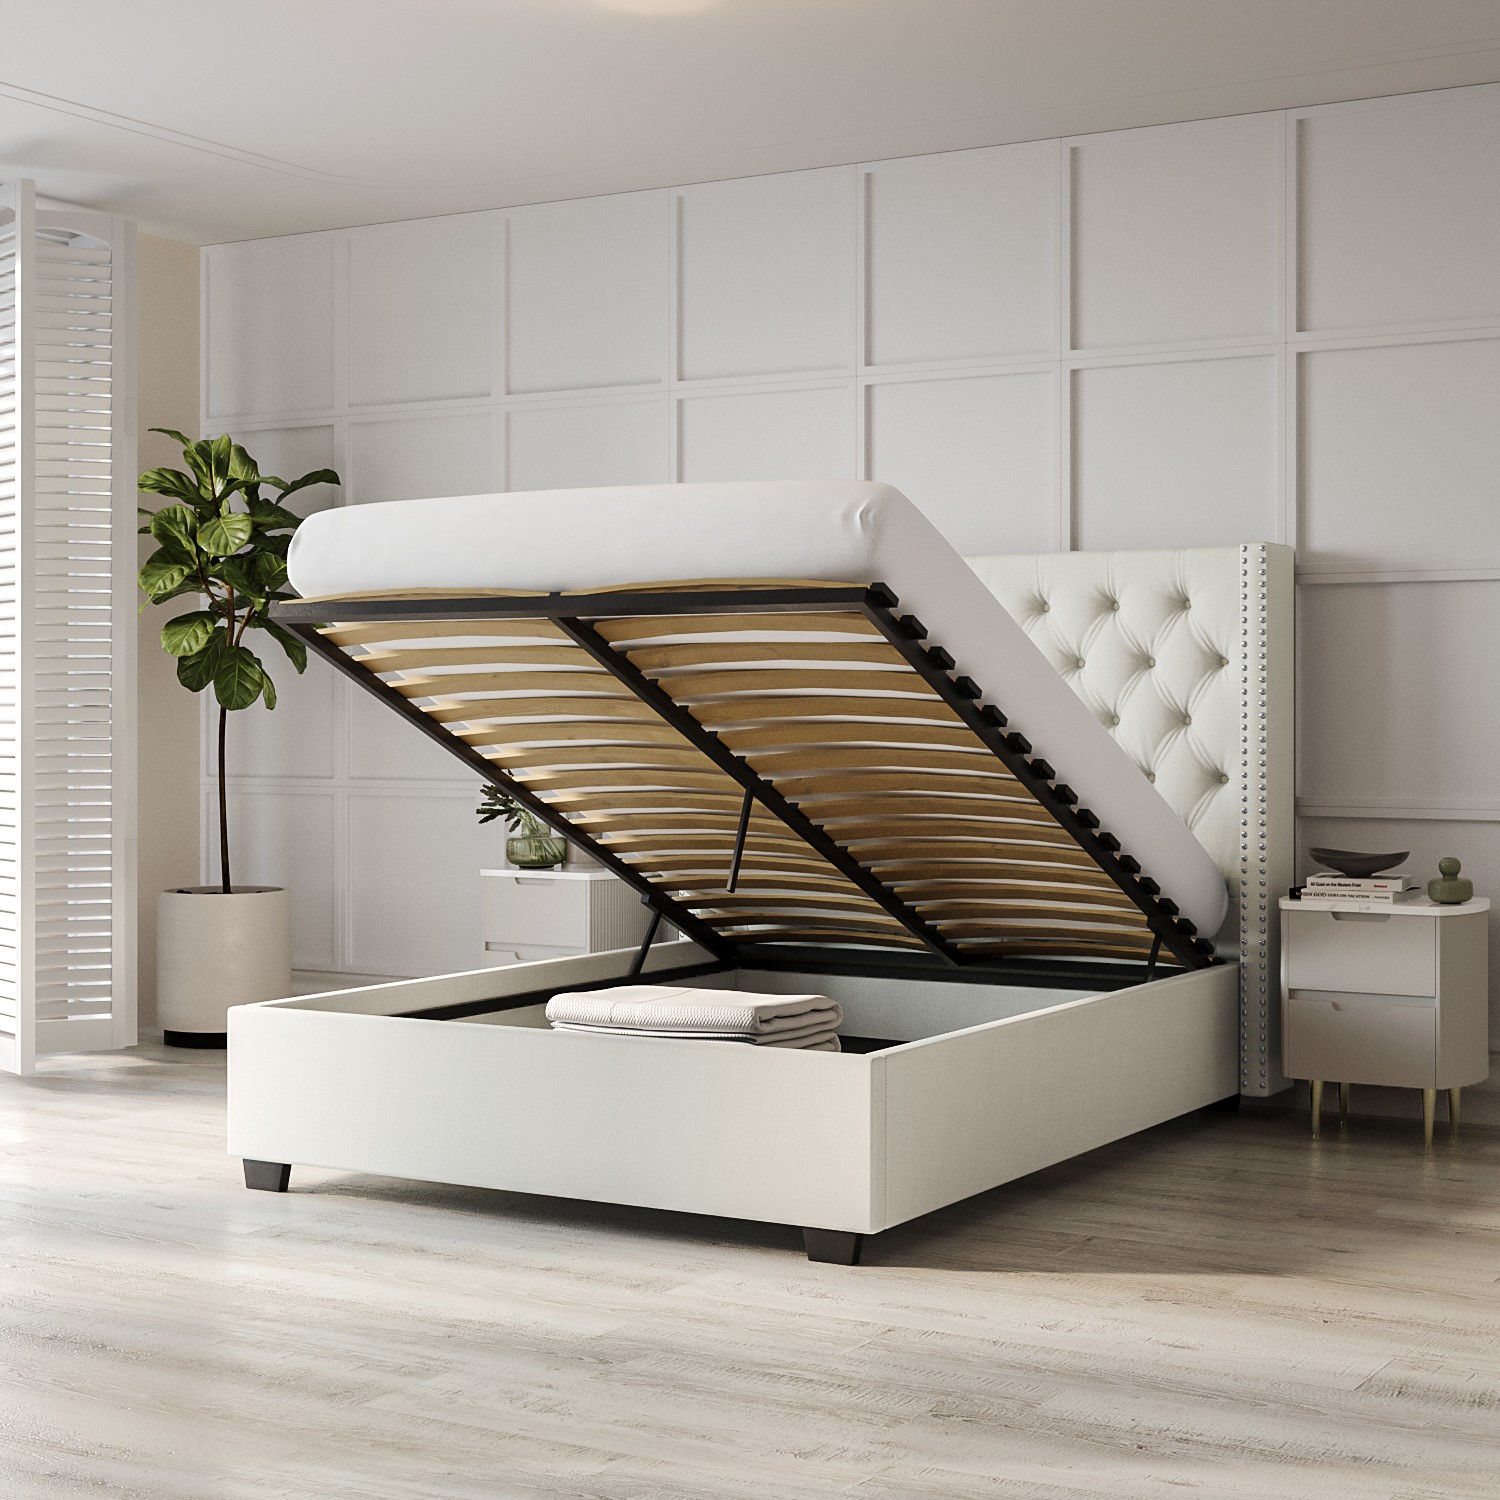 Read more about Off-white fabric king size ottoman bed with winged headboard maeva